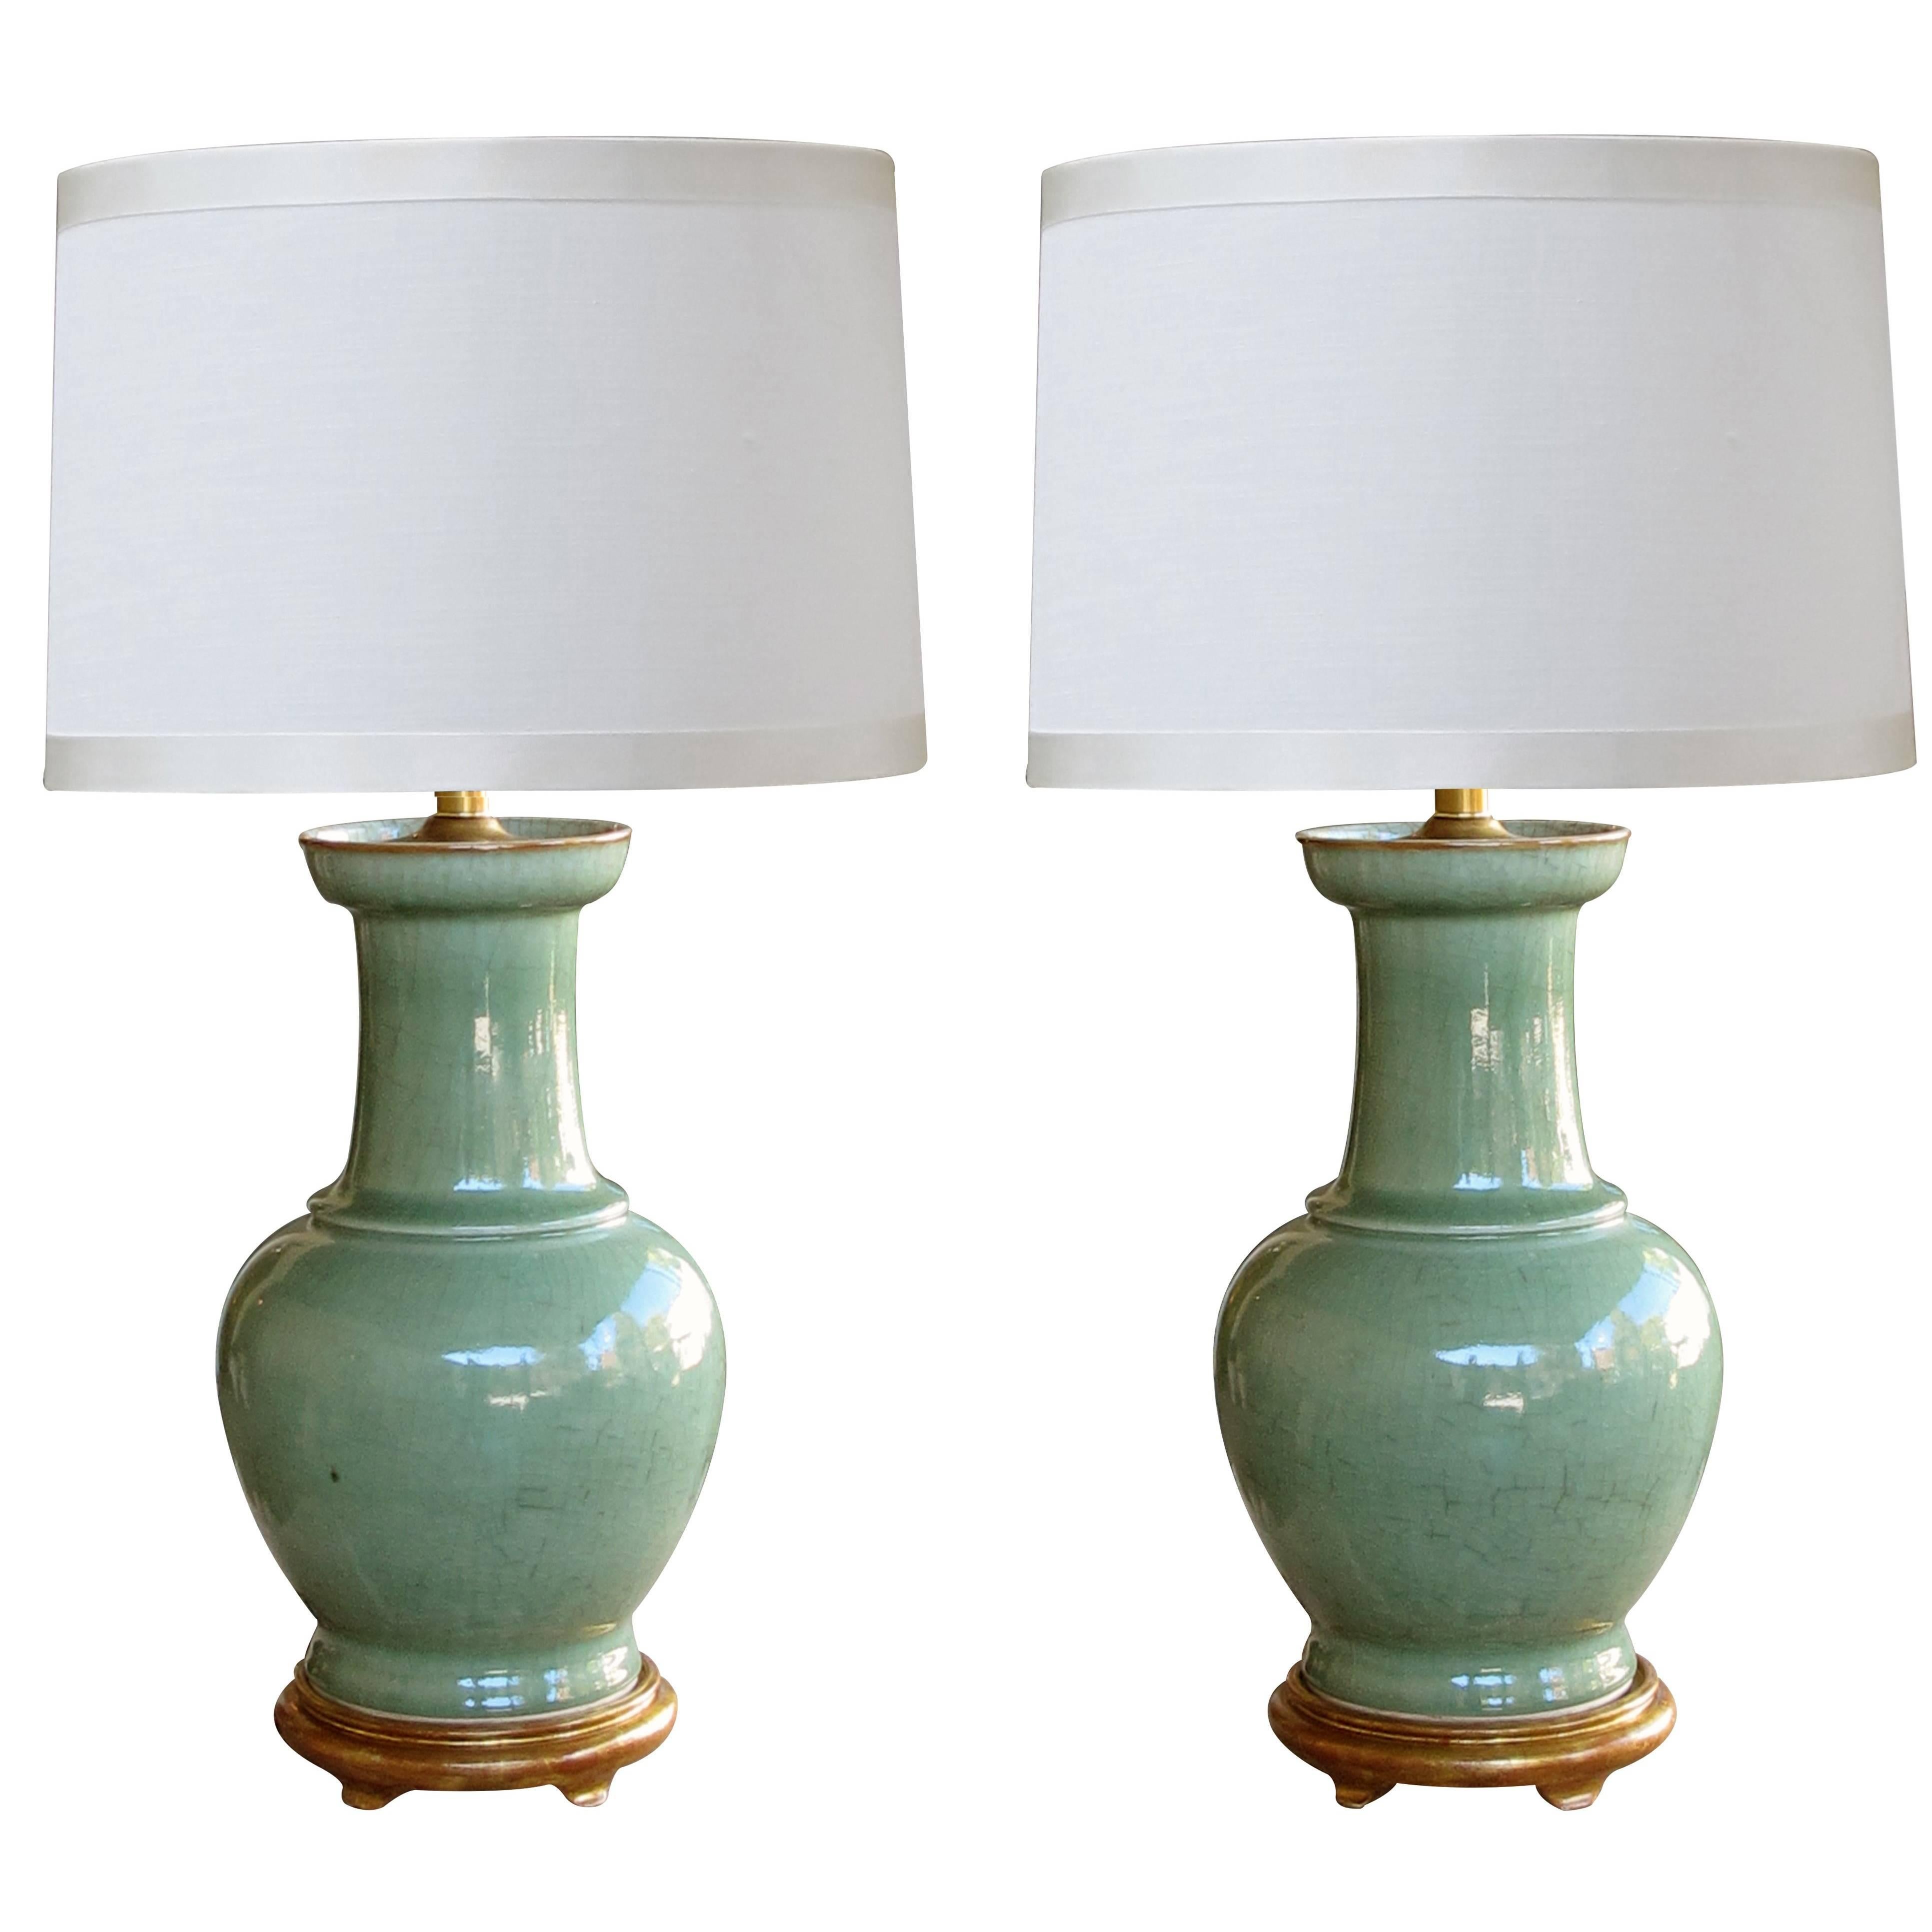 Large Scaled Pair of Antique Chinese Celadon Glazed Vases Now Mounted as Lamps